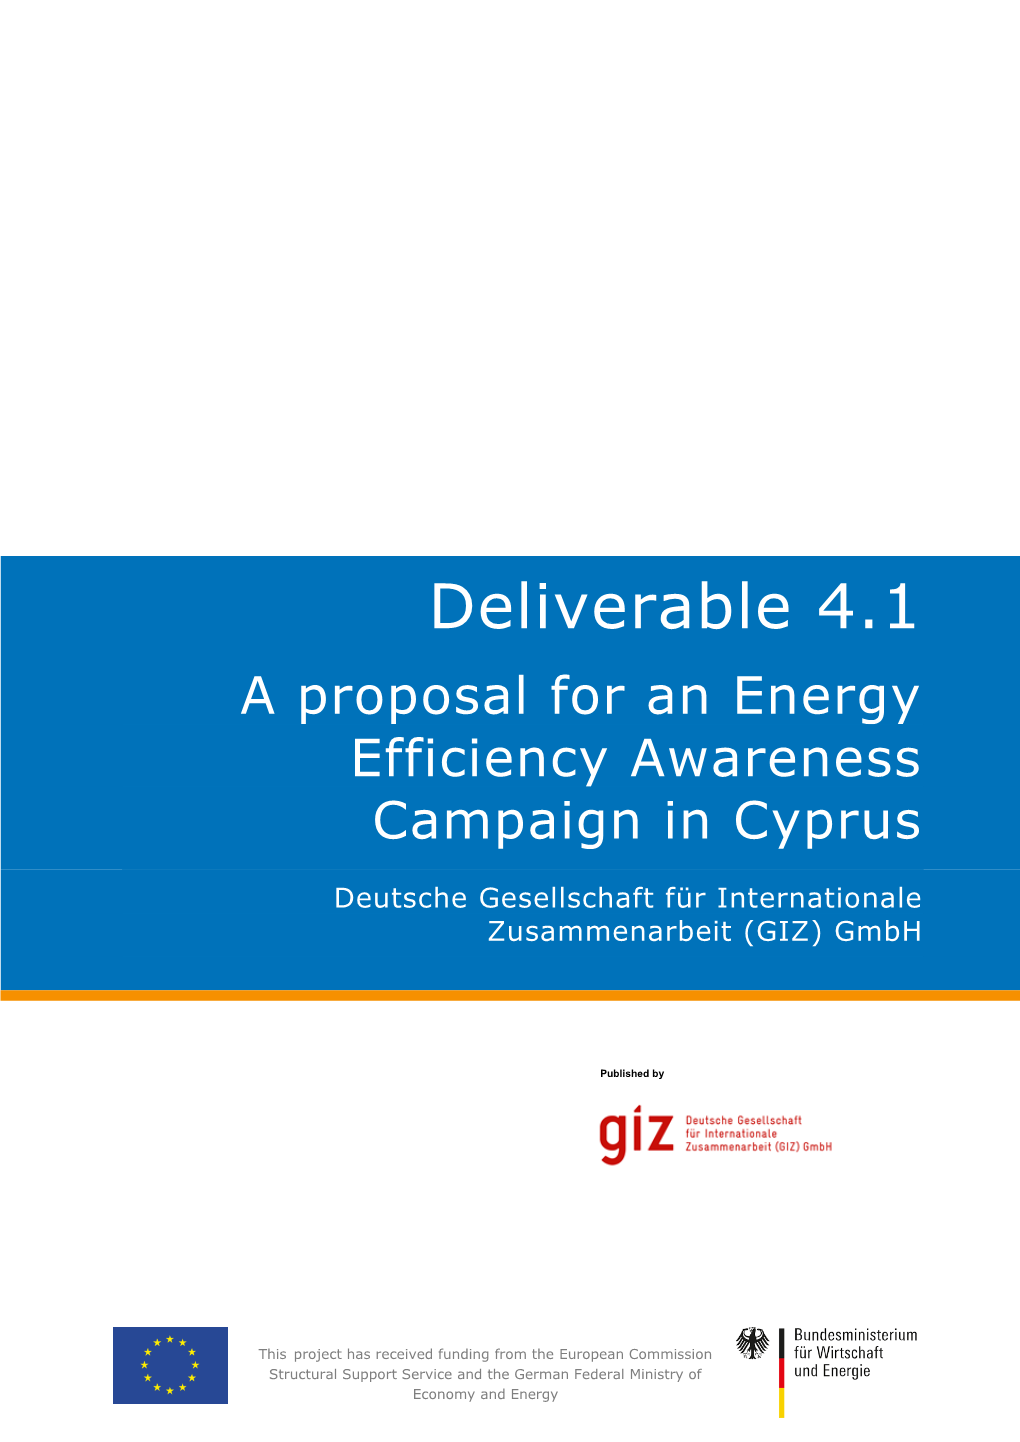 Deliverable 4.1 a Proposal for an Energy Efficiency Awareness Campaign in Cyprus